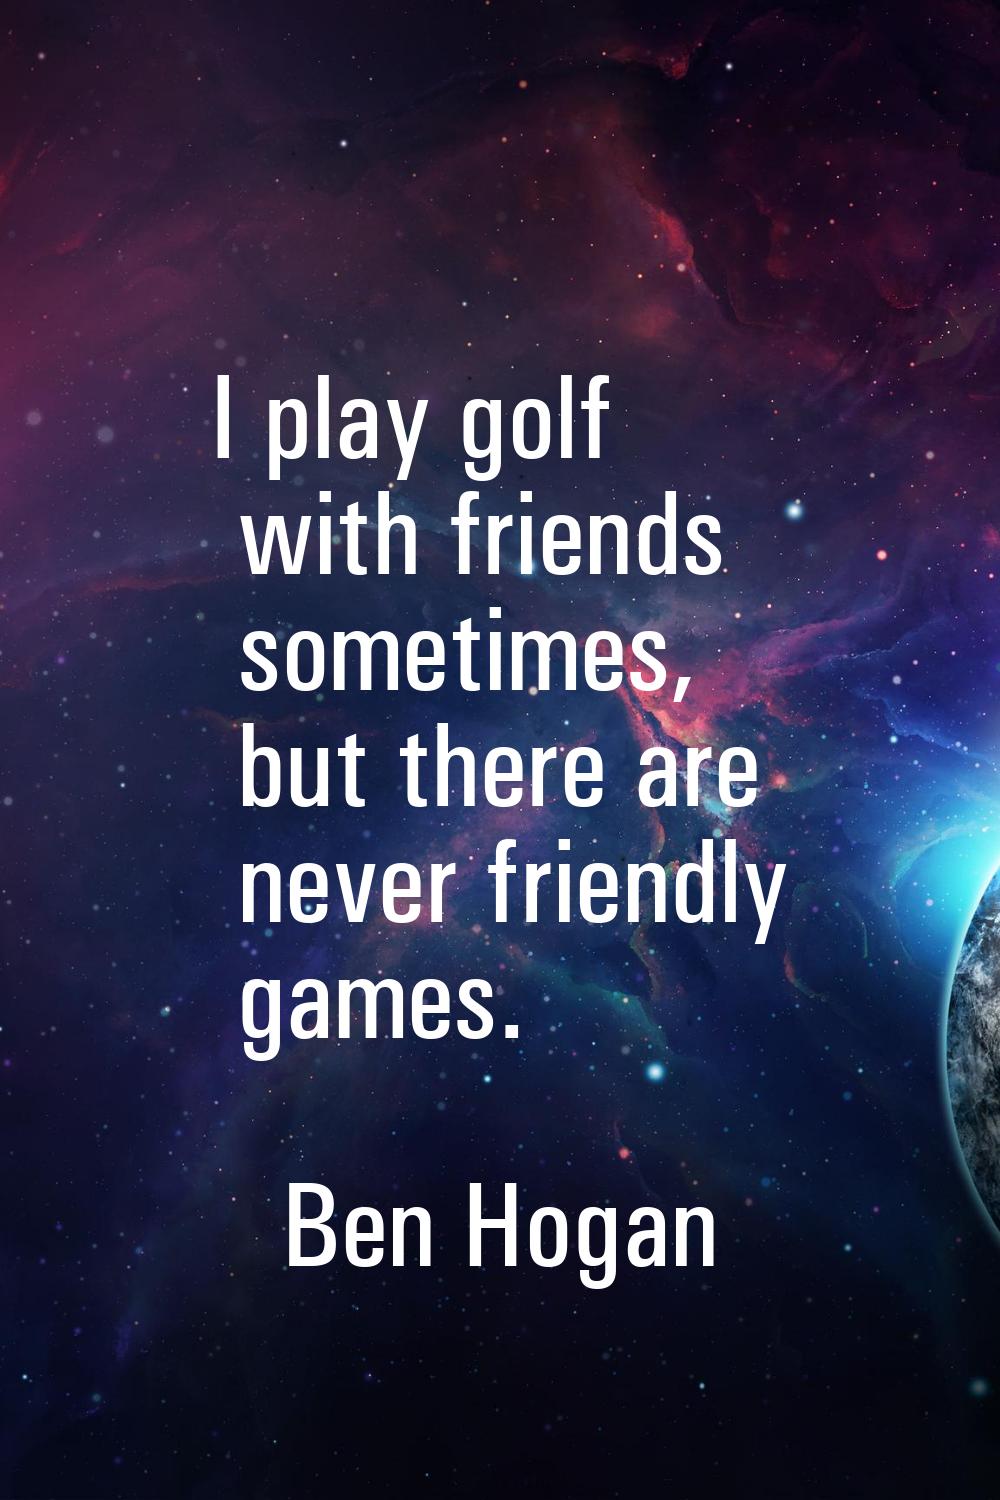 I play golf with friends sometimes, but there are never friendly games.